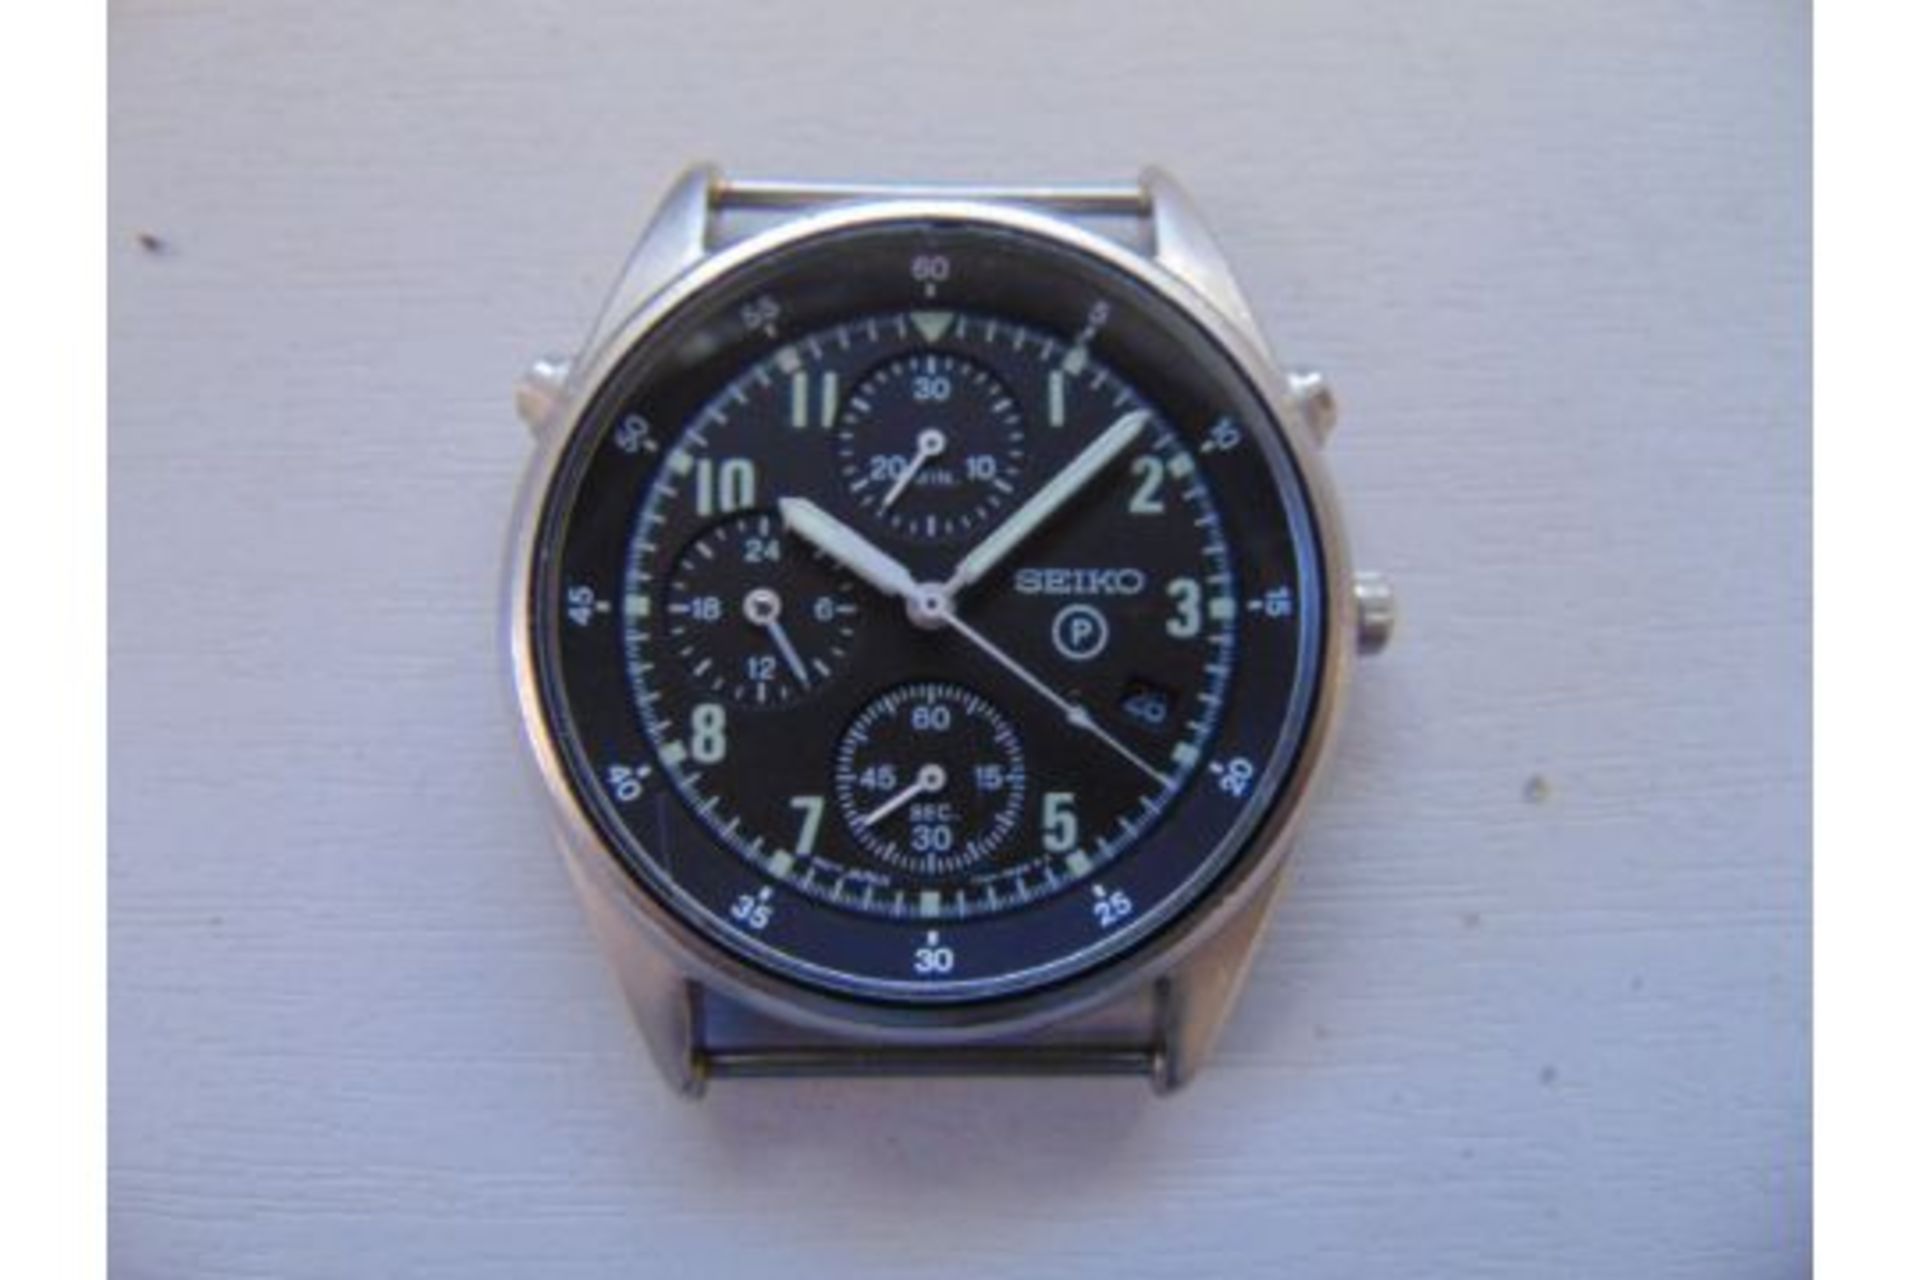 Seiko Gen 2 Pilots Chrono (Date adjust) RAF Tornado Force Issue, Nato Numbers, Date 1995, S/N 3092 - Image 3 of 5